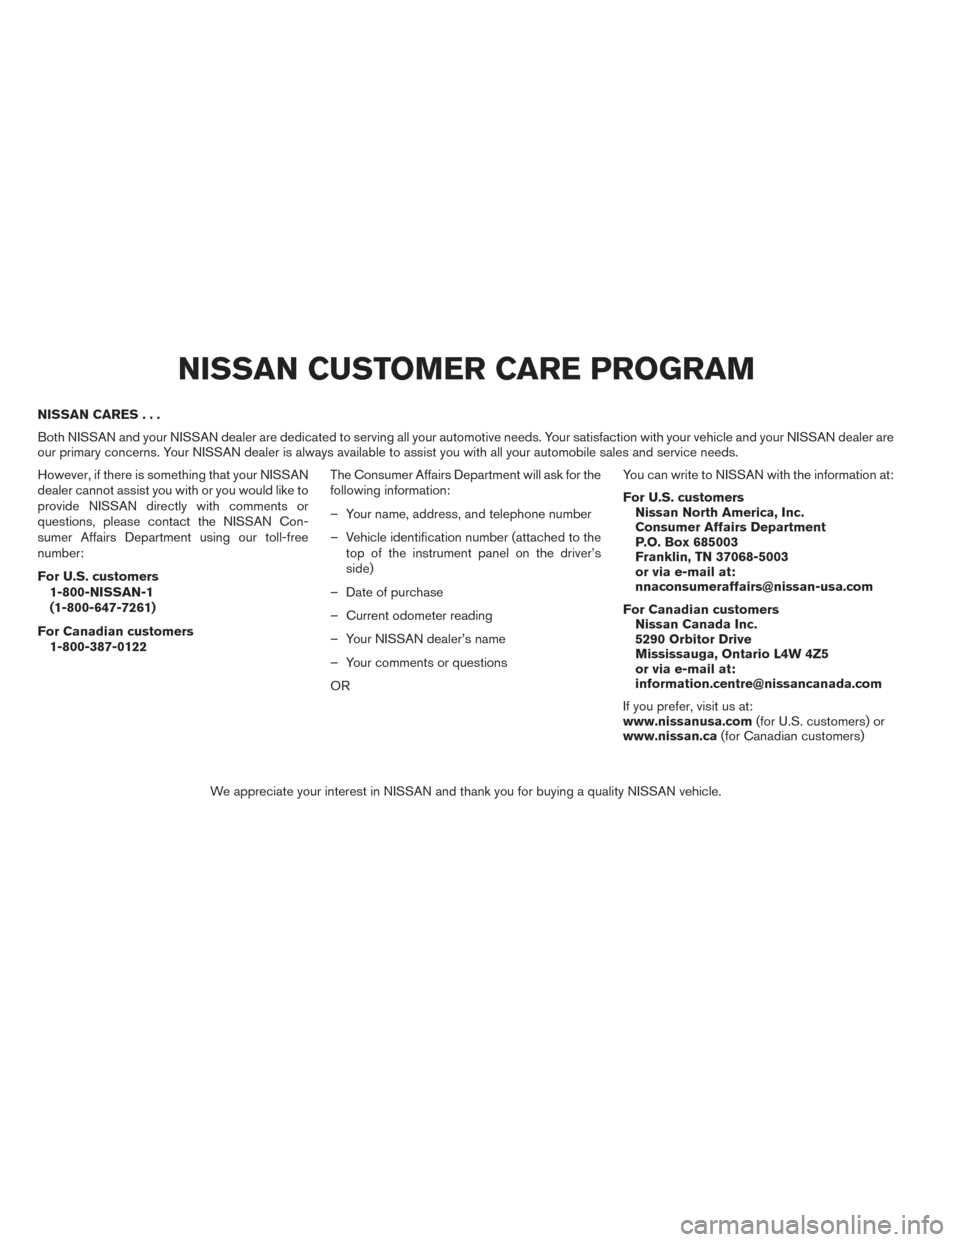 NISSAN XTERRA 2014 N50 / 2.G Owners Manual NISSAN CARES...
Both NISSAN and your NISSAN dealer are dedicated to serving all your automotive needs. Your satisfaction with your vehicle and your NISSAN dealer are
our primary concerns. Your NISSAN 